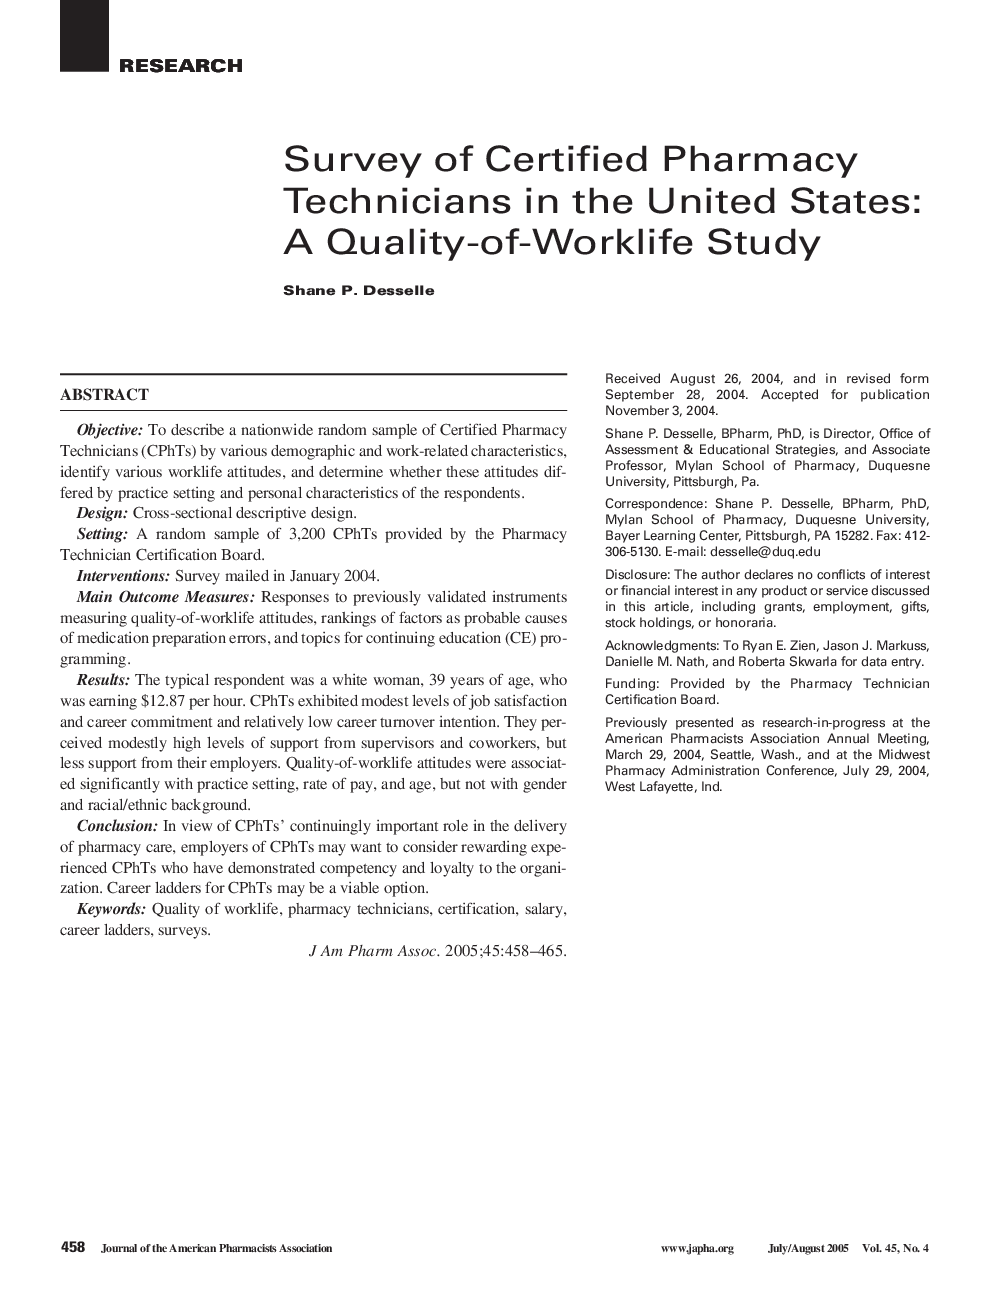 Survey of Certified Pharmacy Technicians in the United States: A Quality-of-Worklife Study